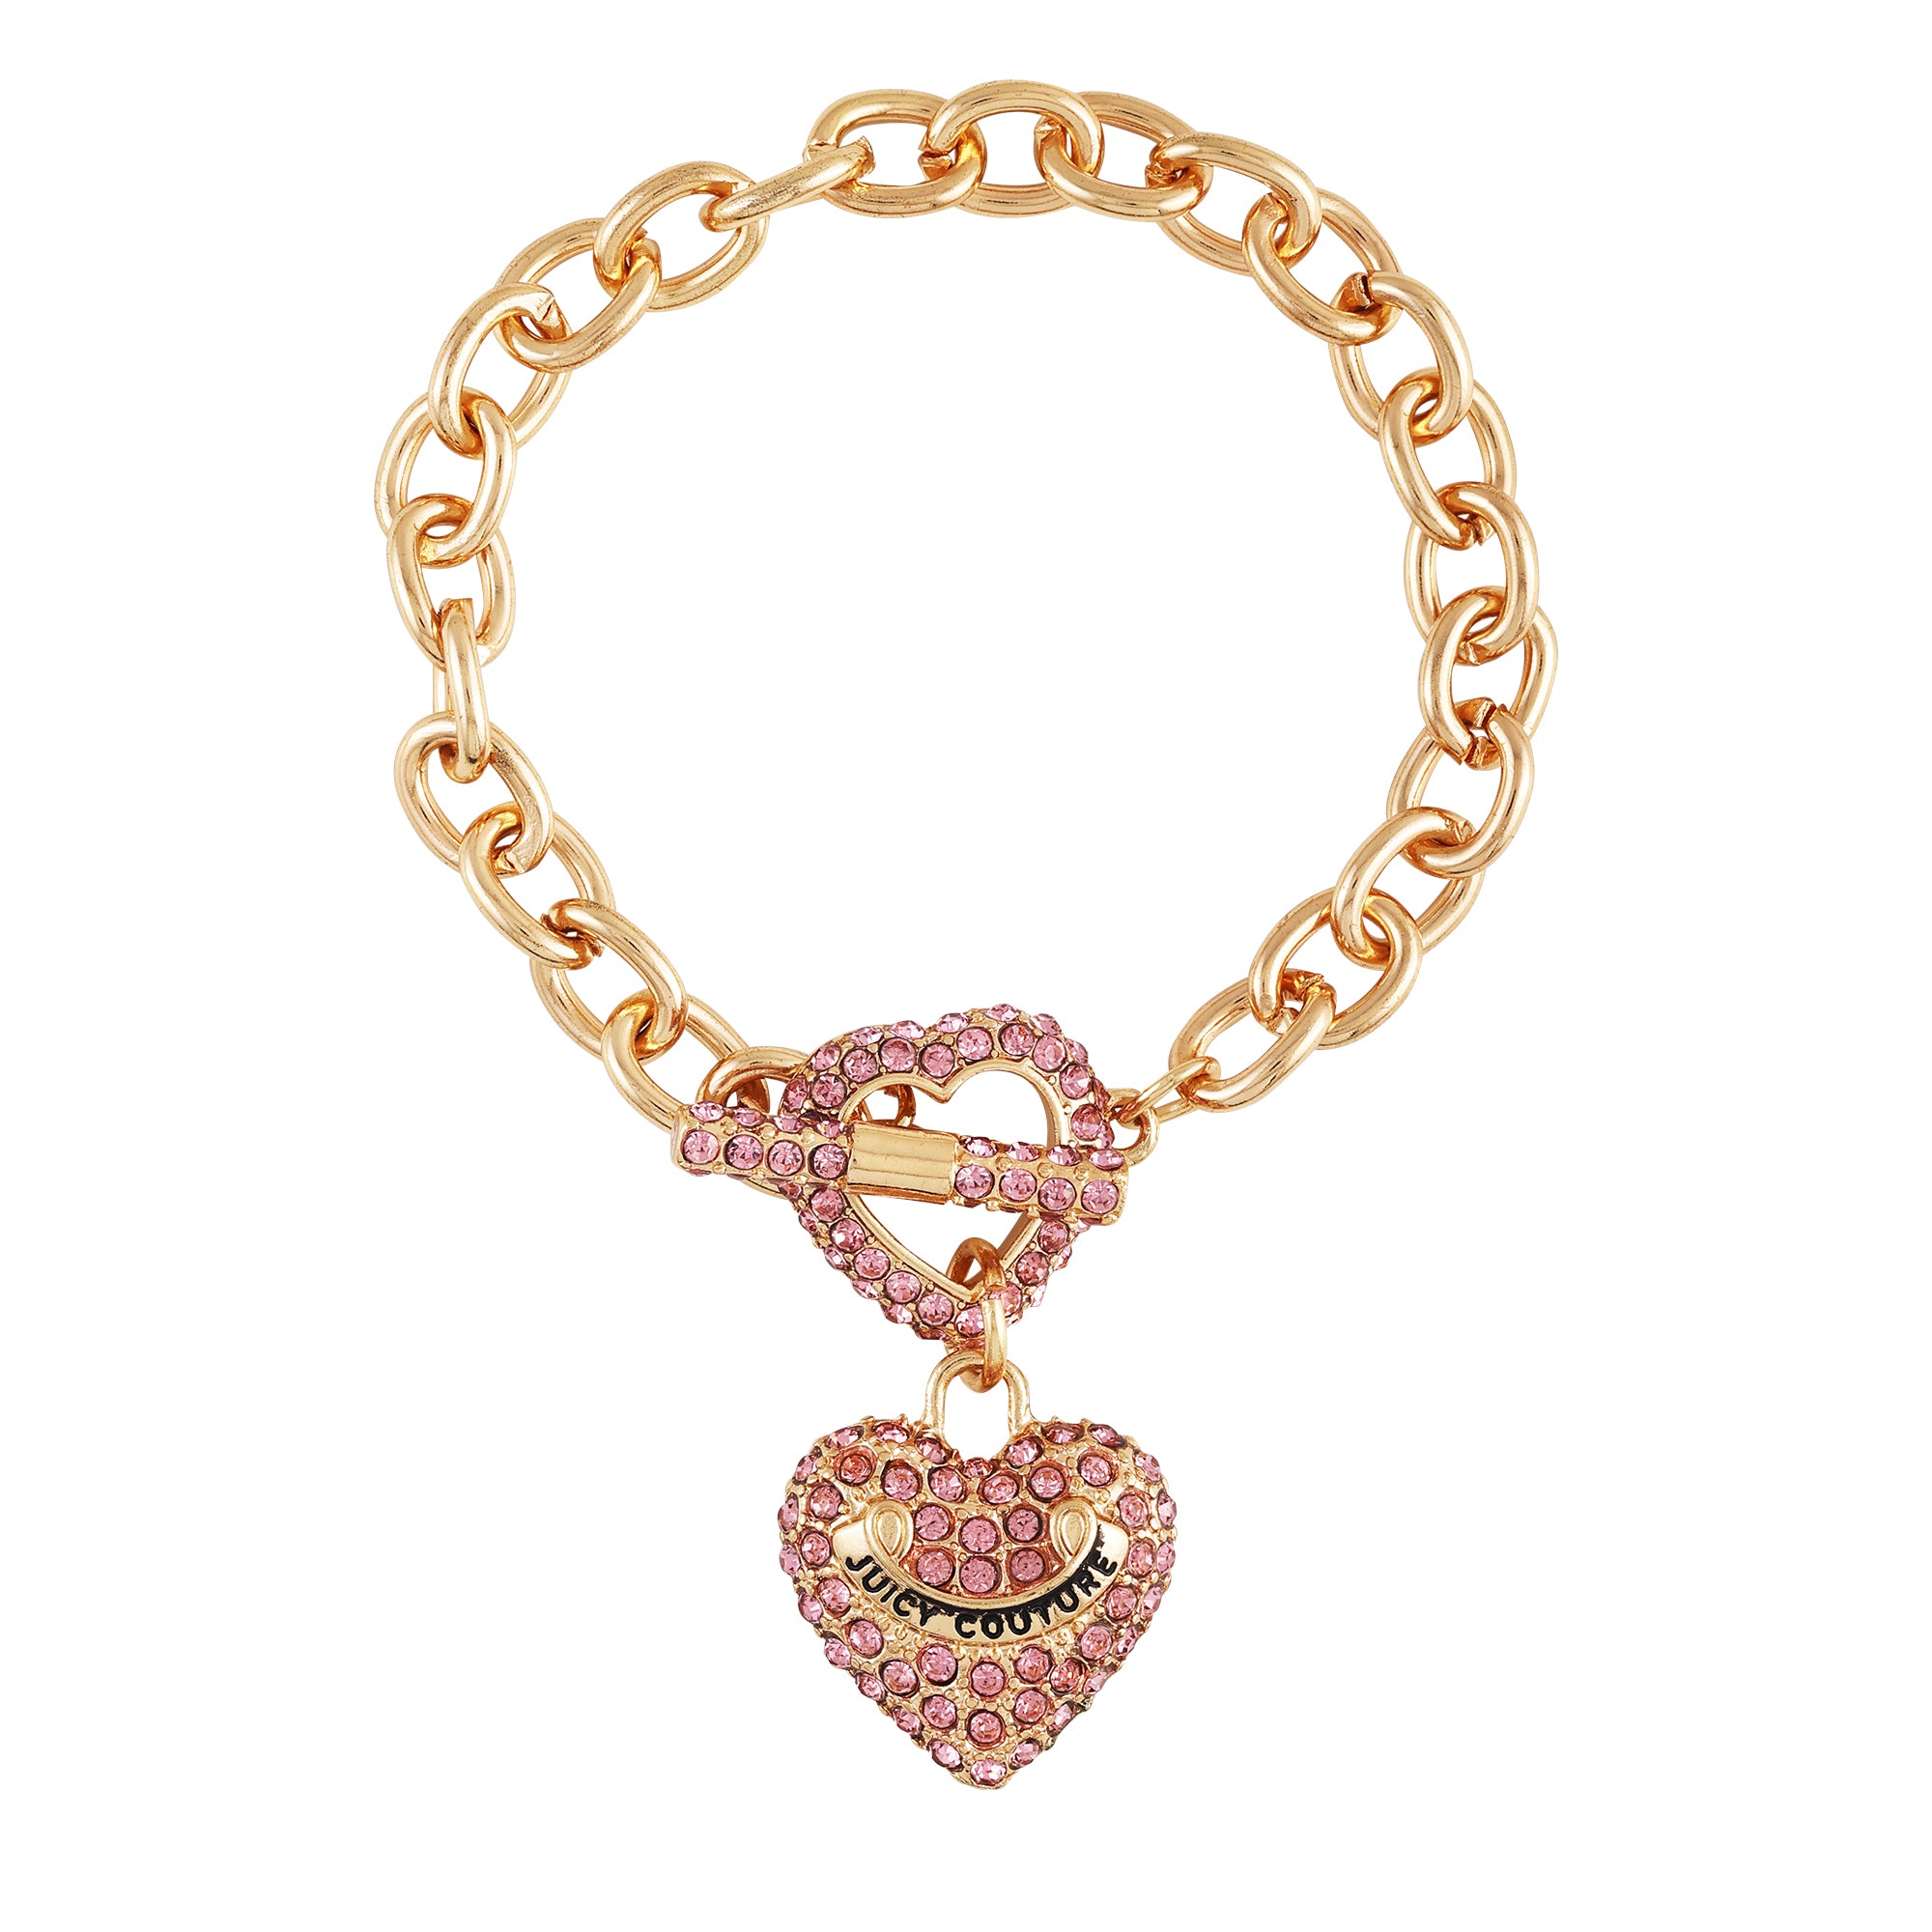 Juicy Couture Goldtone Pave Heart Black Leather Bangle Bracelet in Metallic